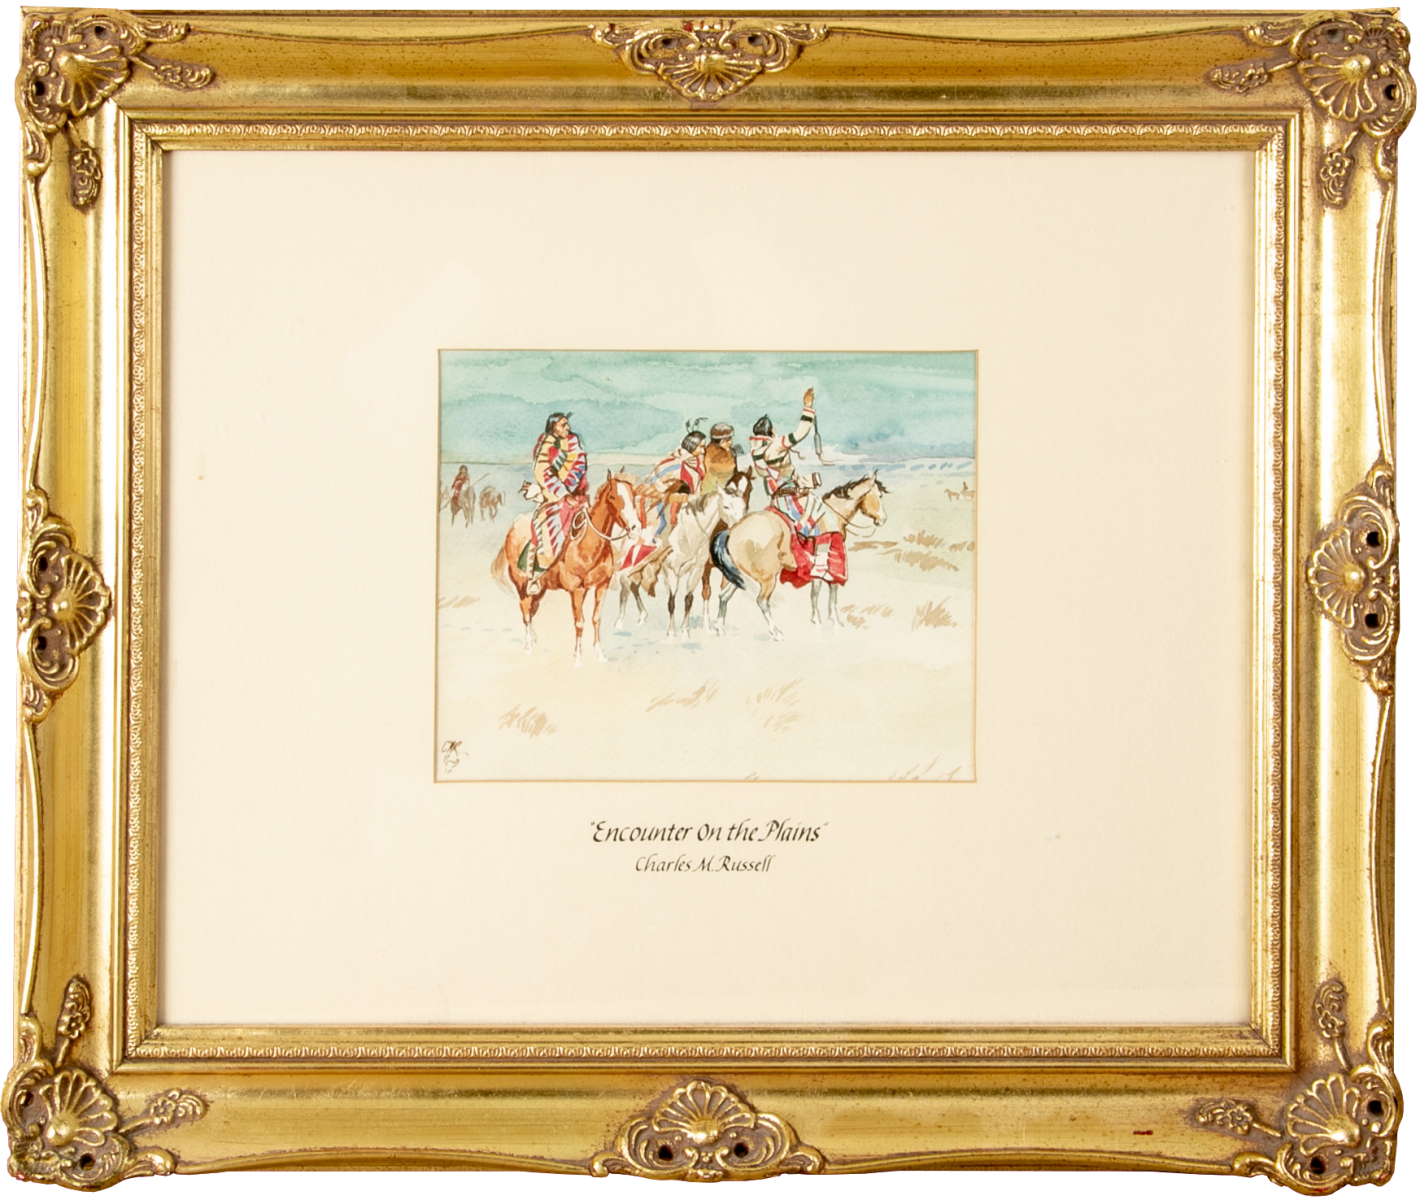 CM Russell watercolor (Charles M. Russell) "Encounter on the Plains"